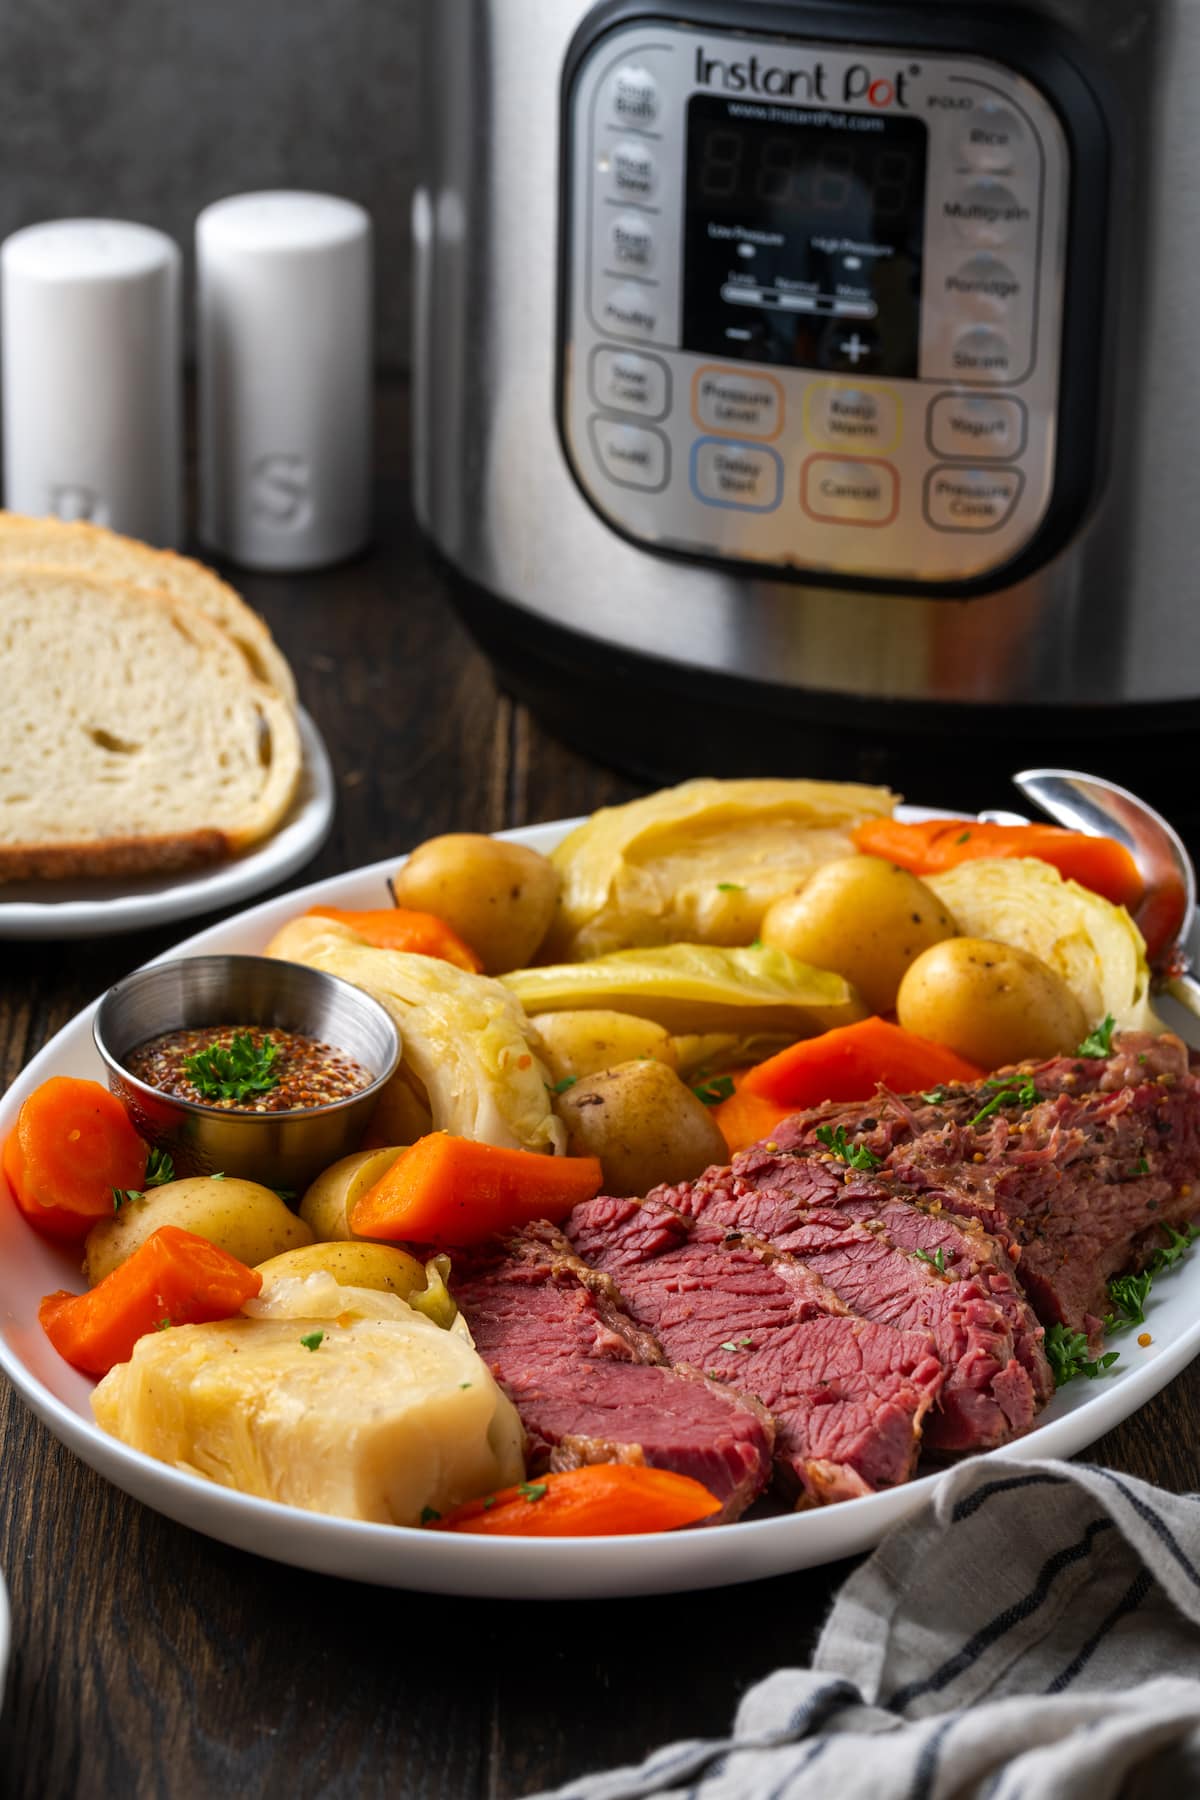 Sliced corned beef on a plate next to cabbage, potatoes, and carrots, with the Instant Pot and a place of bread slices in the background.